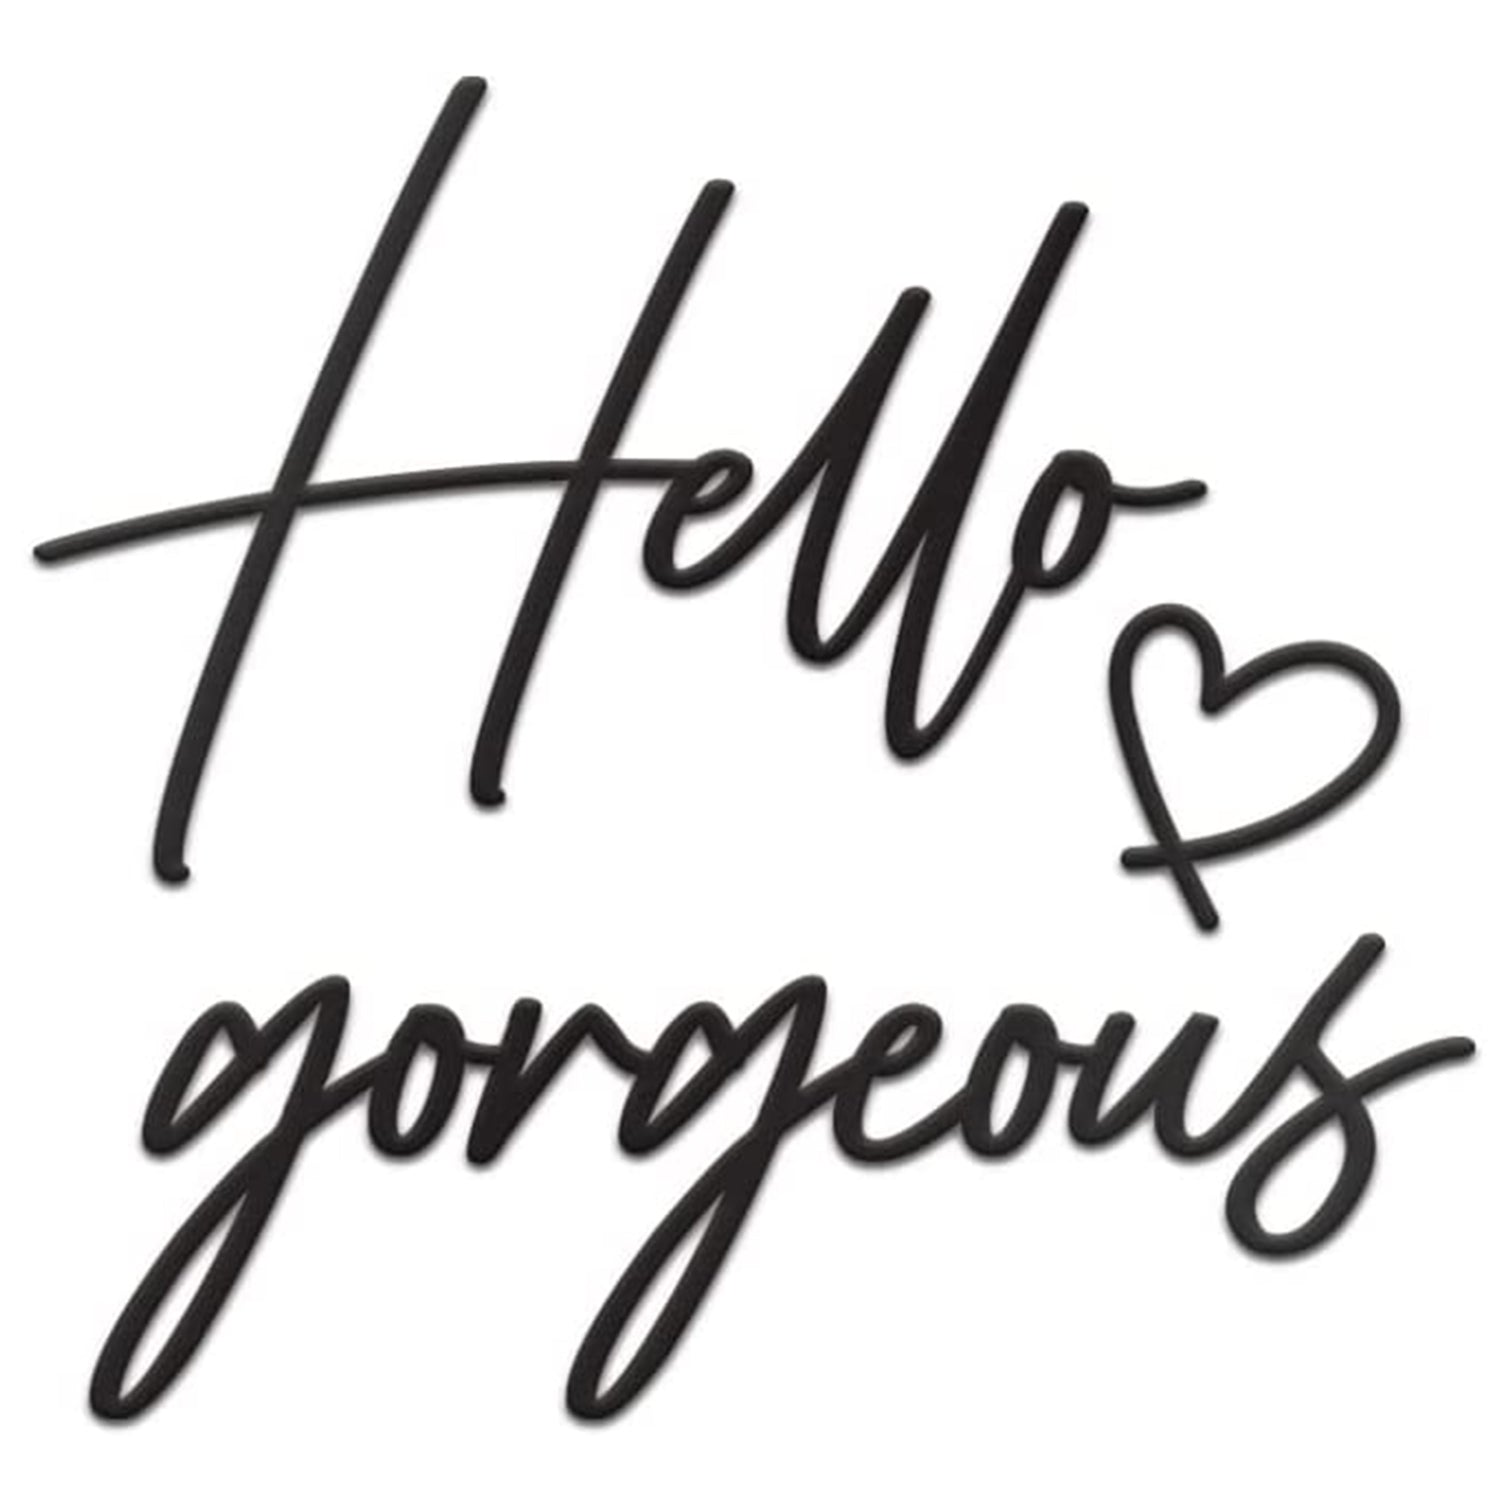 Hello Gorgeous Sign Metal Wall Decor - 20"X15" Black Modern Beautiful Hello Gorgeous Farmhouse Metal Wall Signs for Hanging Any Room Wall Art Decor